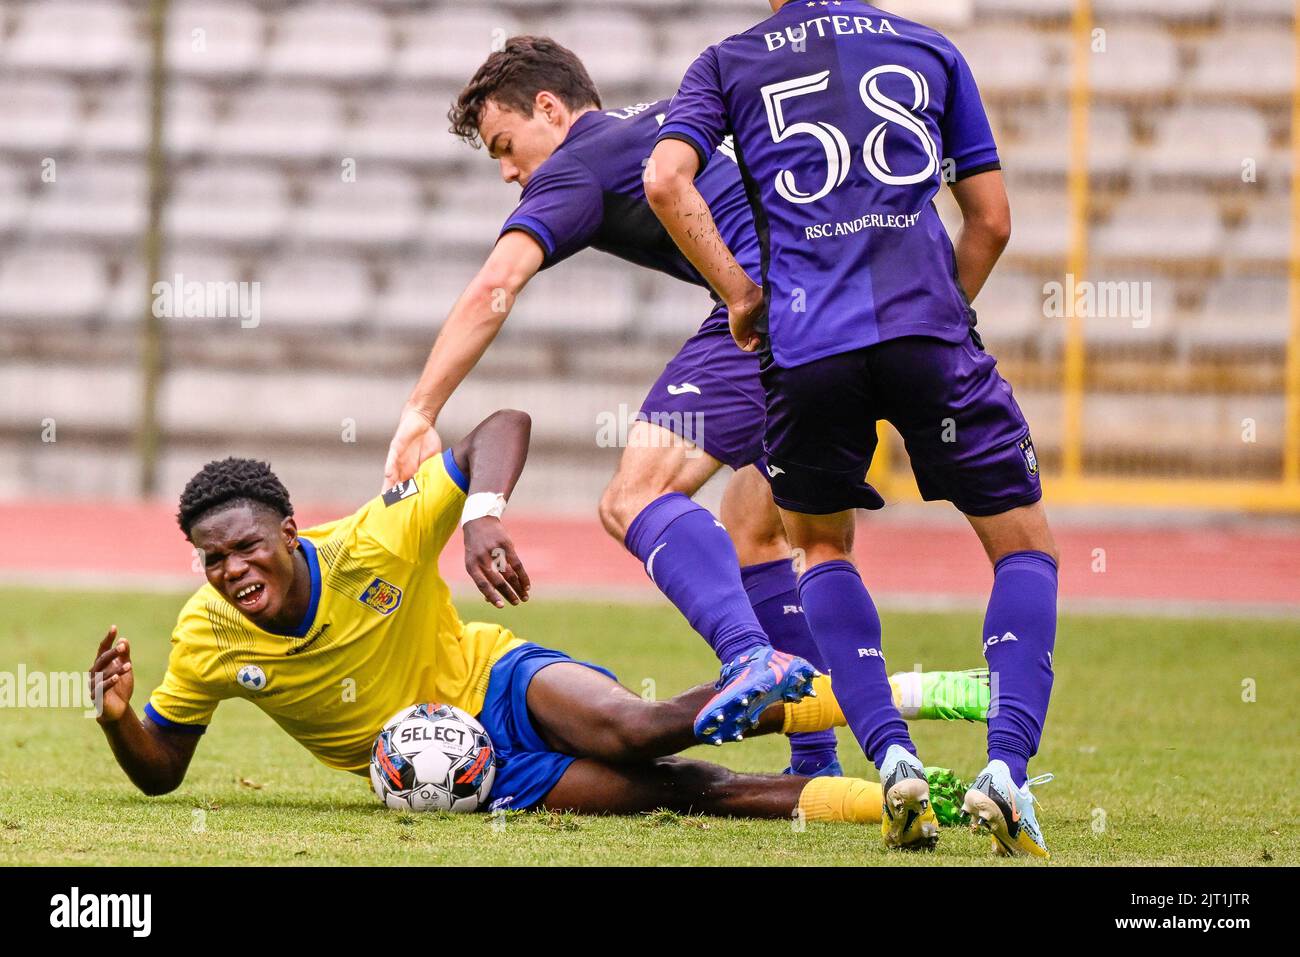 RSCA Futures' David Hubert celebrates after scoring during a soccer match  between RSC Anderlecht, Stock Photo, Picture And Rights Managed Image.  Pic. VPM-43637830